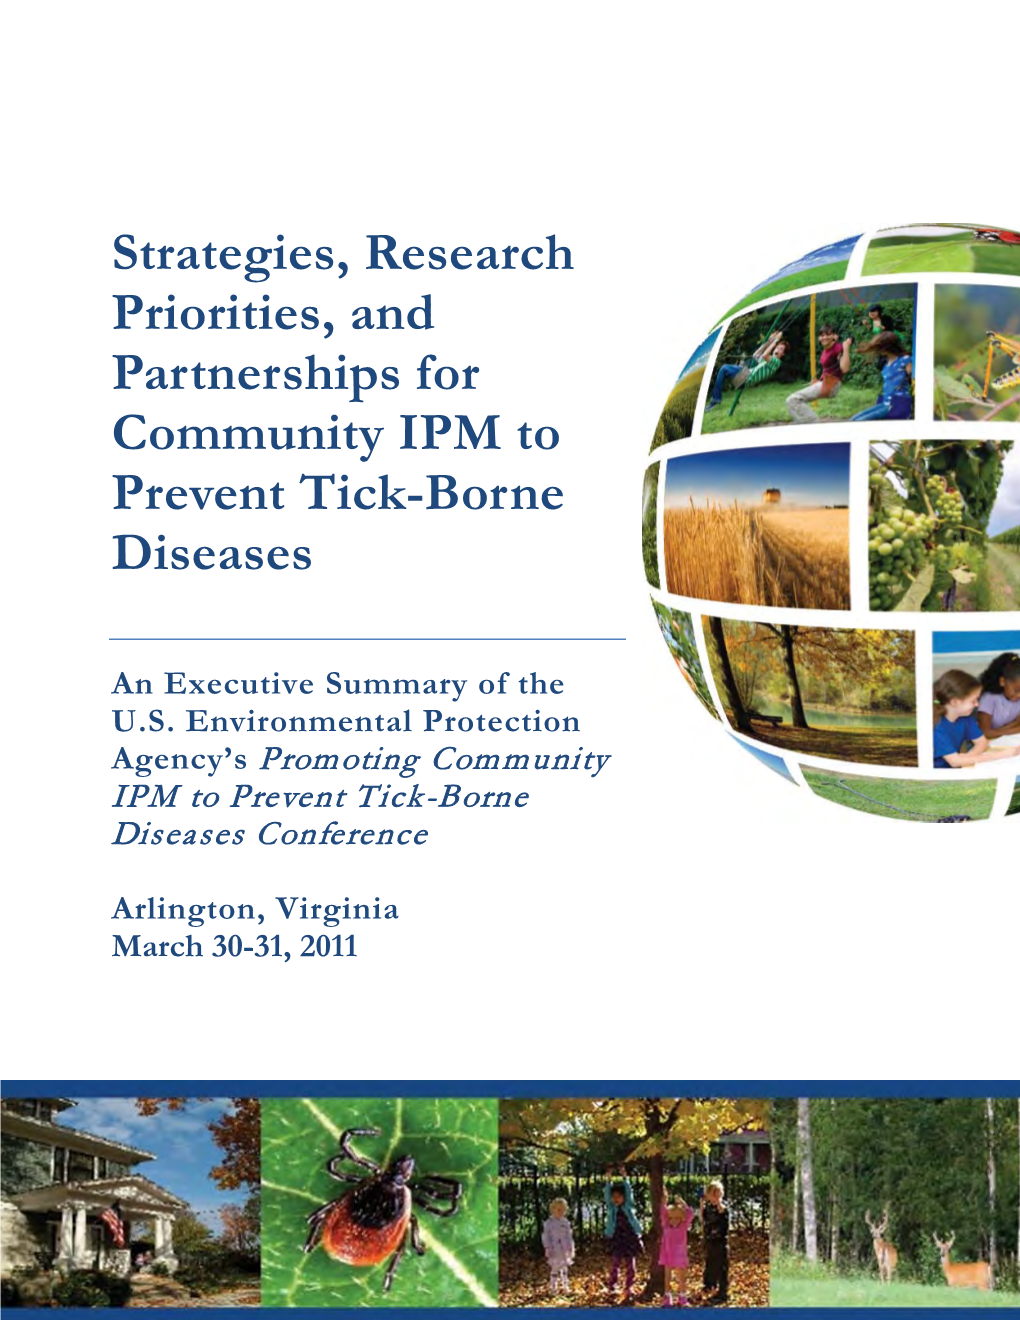 Strategies, Research Priorities, and Partnerships for Community IPM to Prevent Tick-Borne Diseases